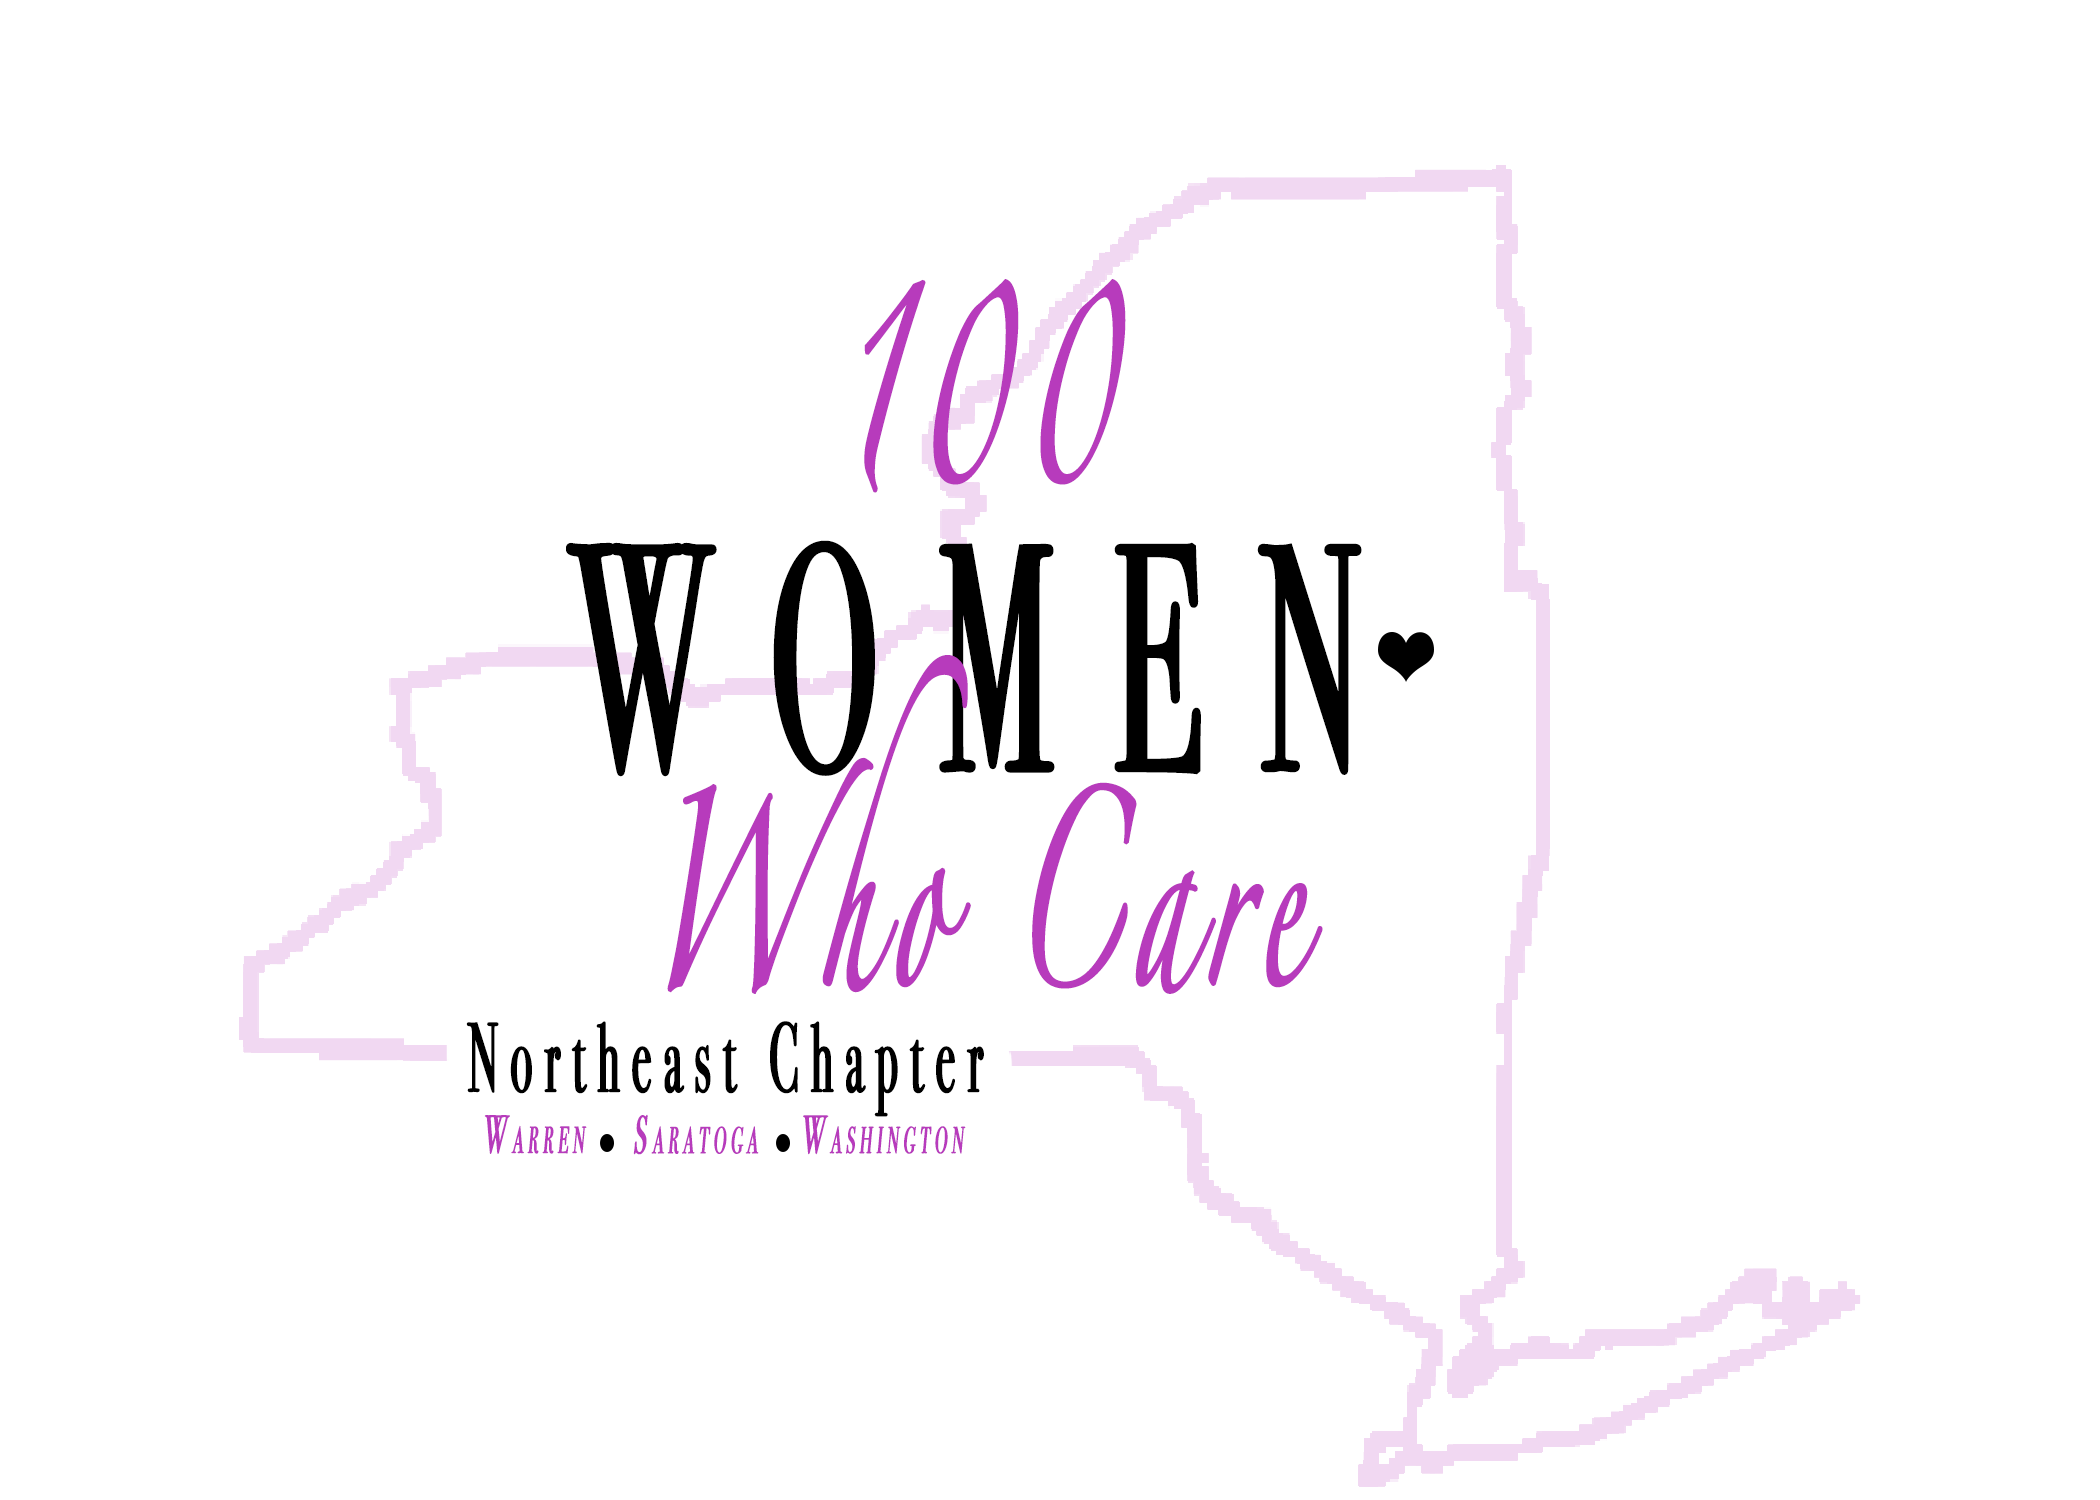 100 Women Who Care of the Northeast